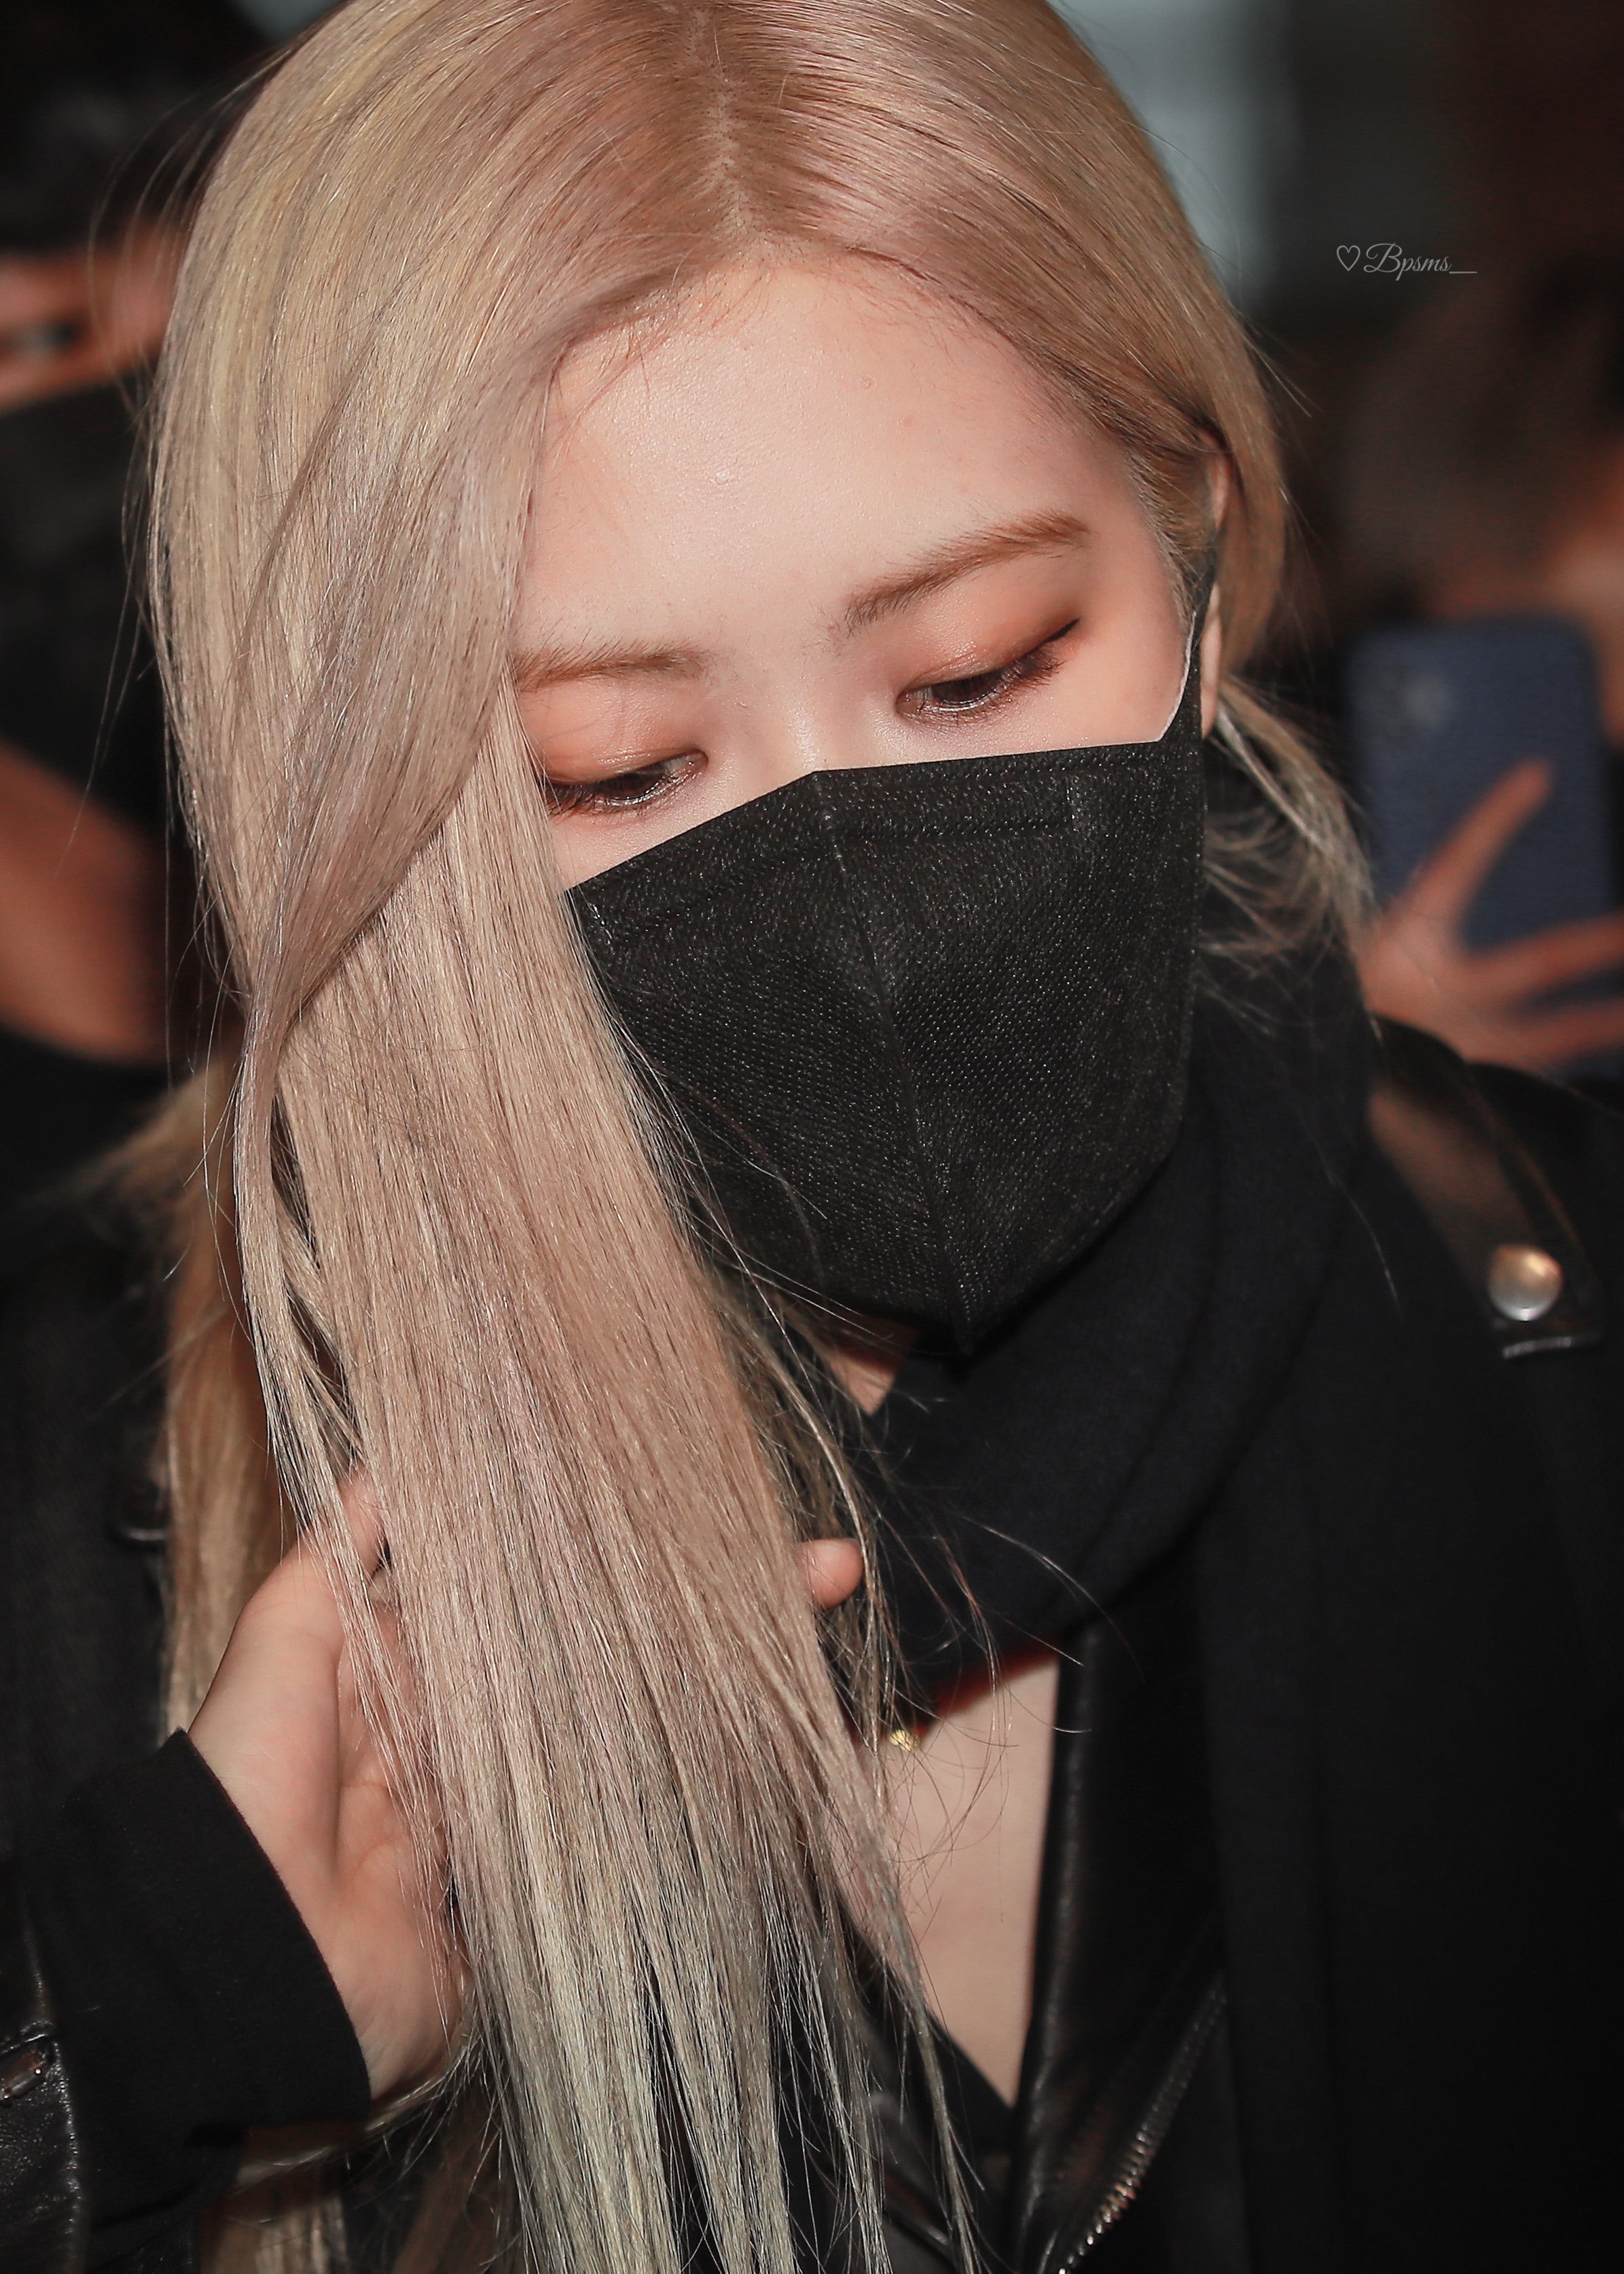 Blackpink Rosé at Incheon Airport heading to Los Angeles